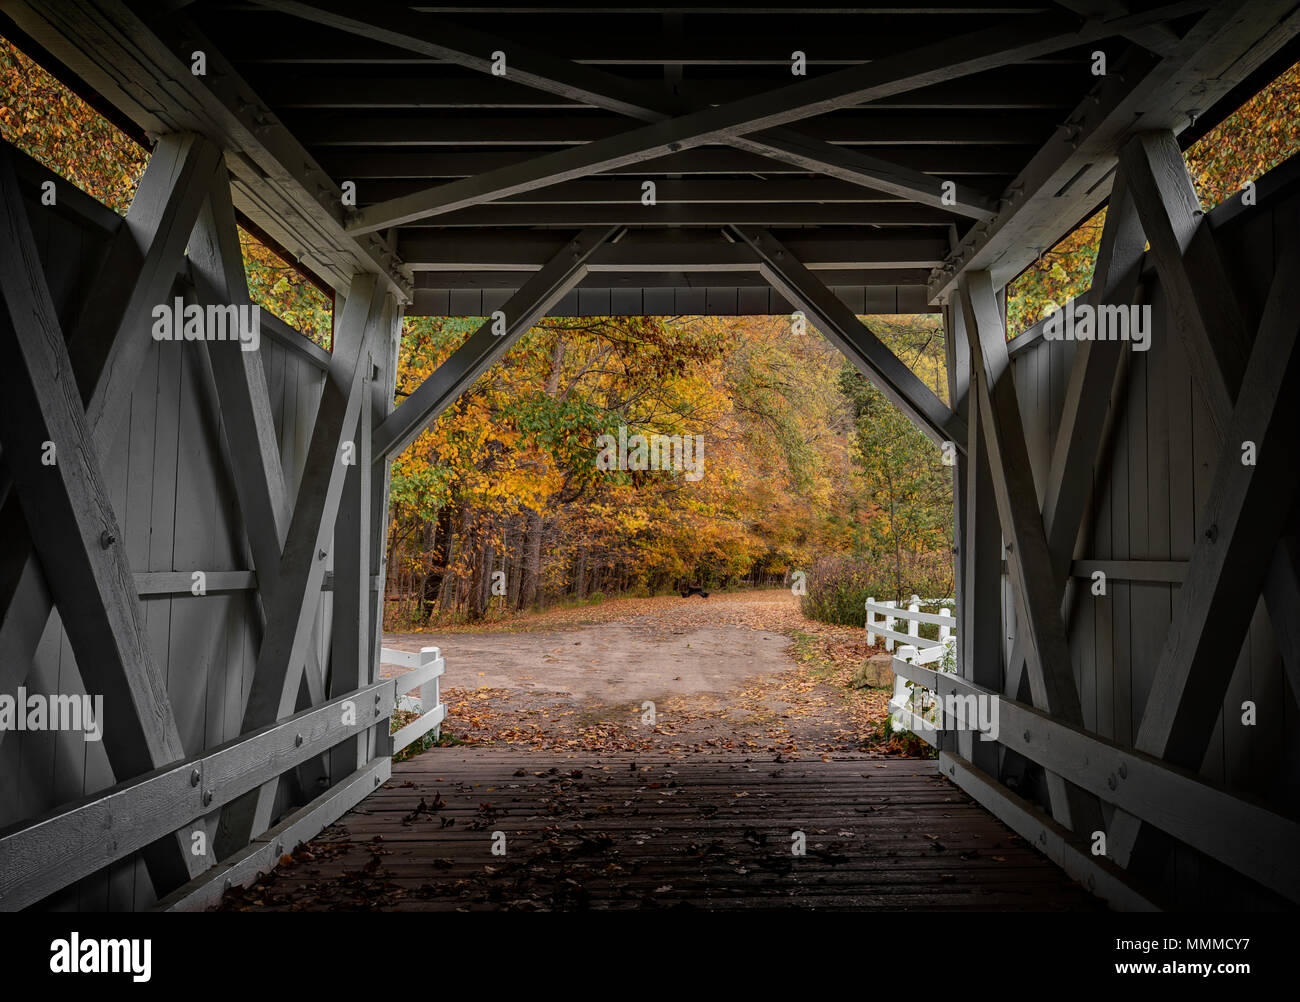 Looking out at the beautiful fall colors from the inside of the Everett Road Covered Bridge in the Cuyahoga Valley National Park in Ohio. Stock Photo